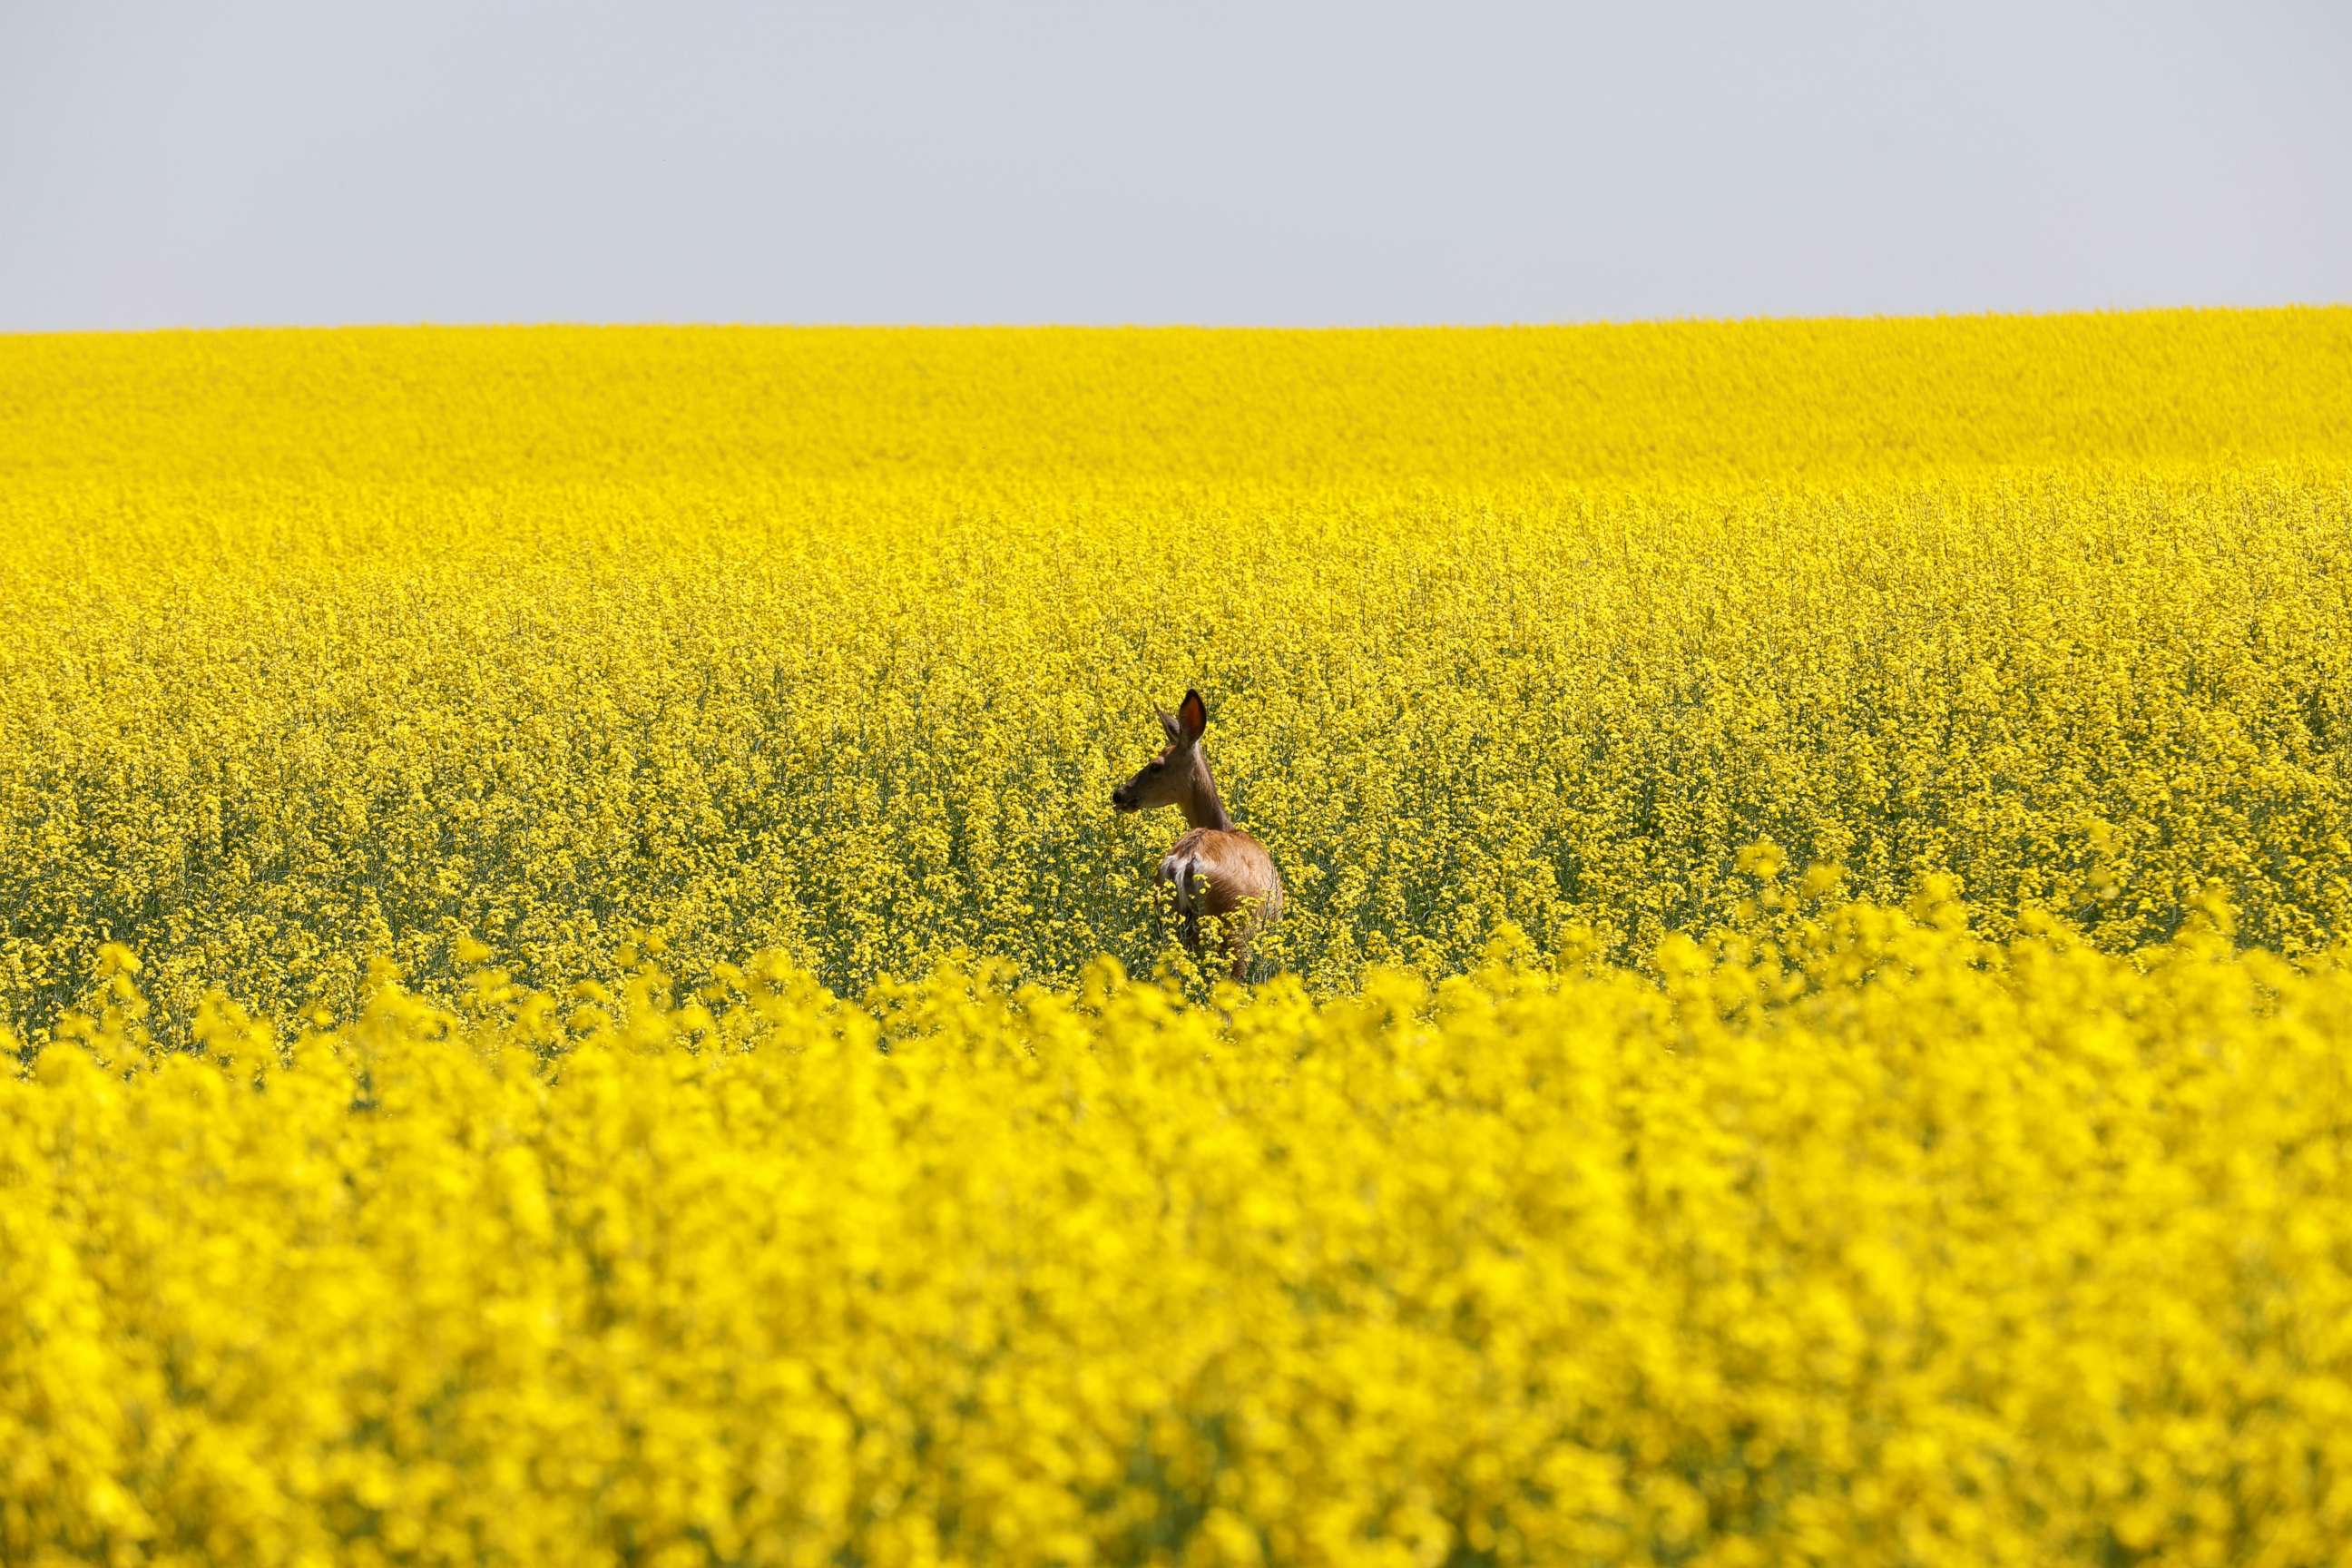 PHOTO: A deer feeds in a canola field that is in full bloom before harvest in rural Alberta, Canada, July 23, 2019.